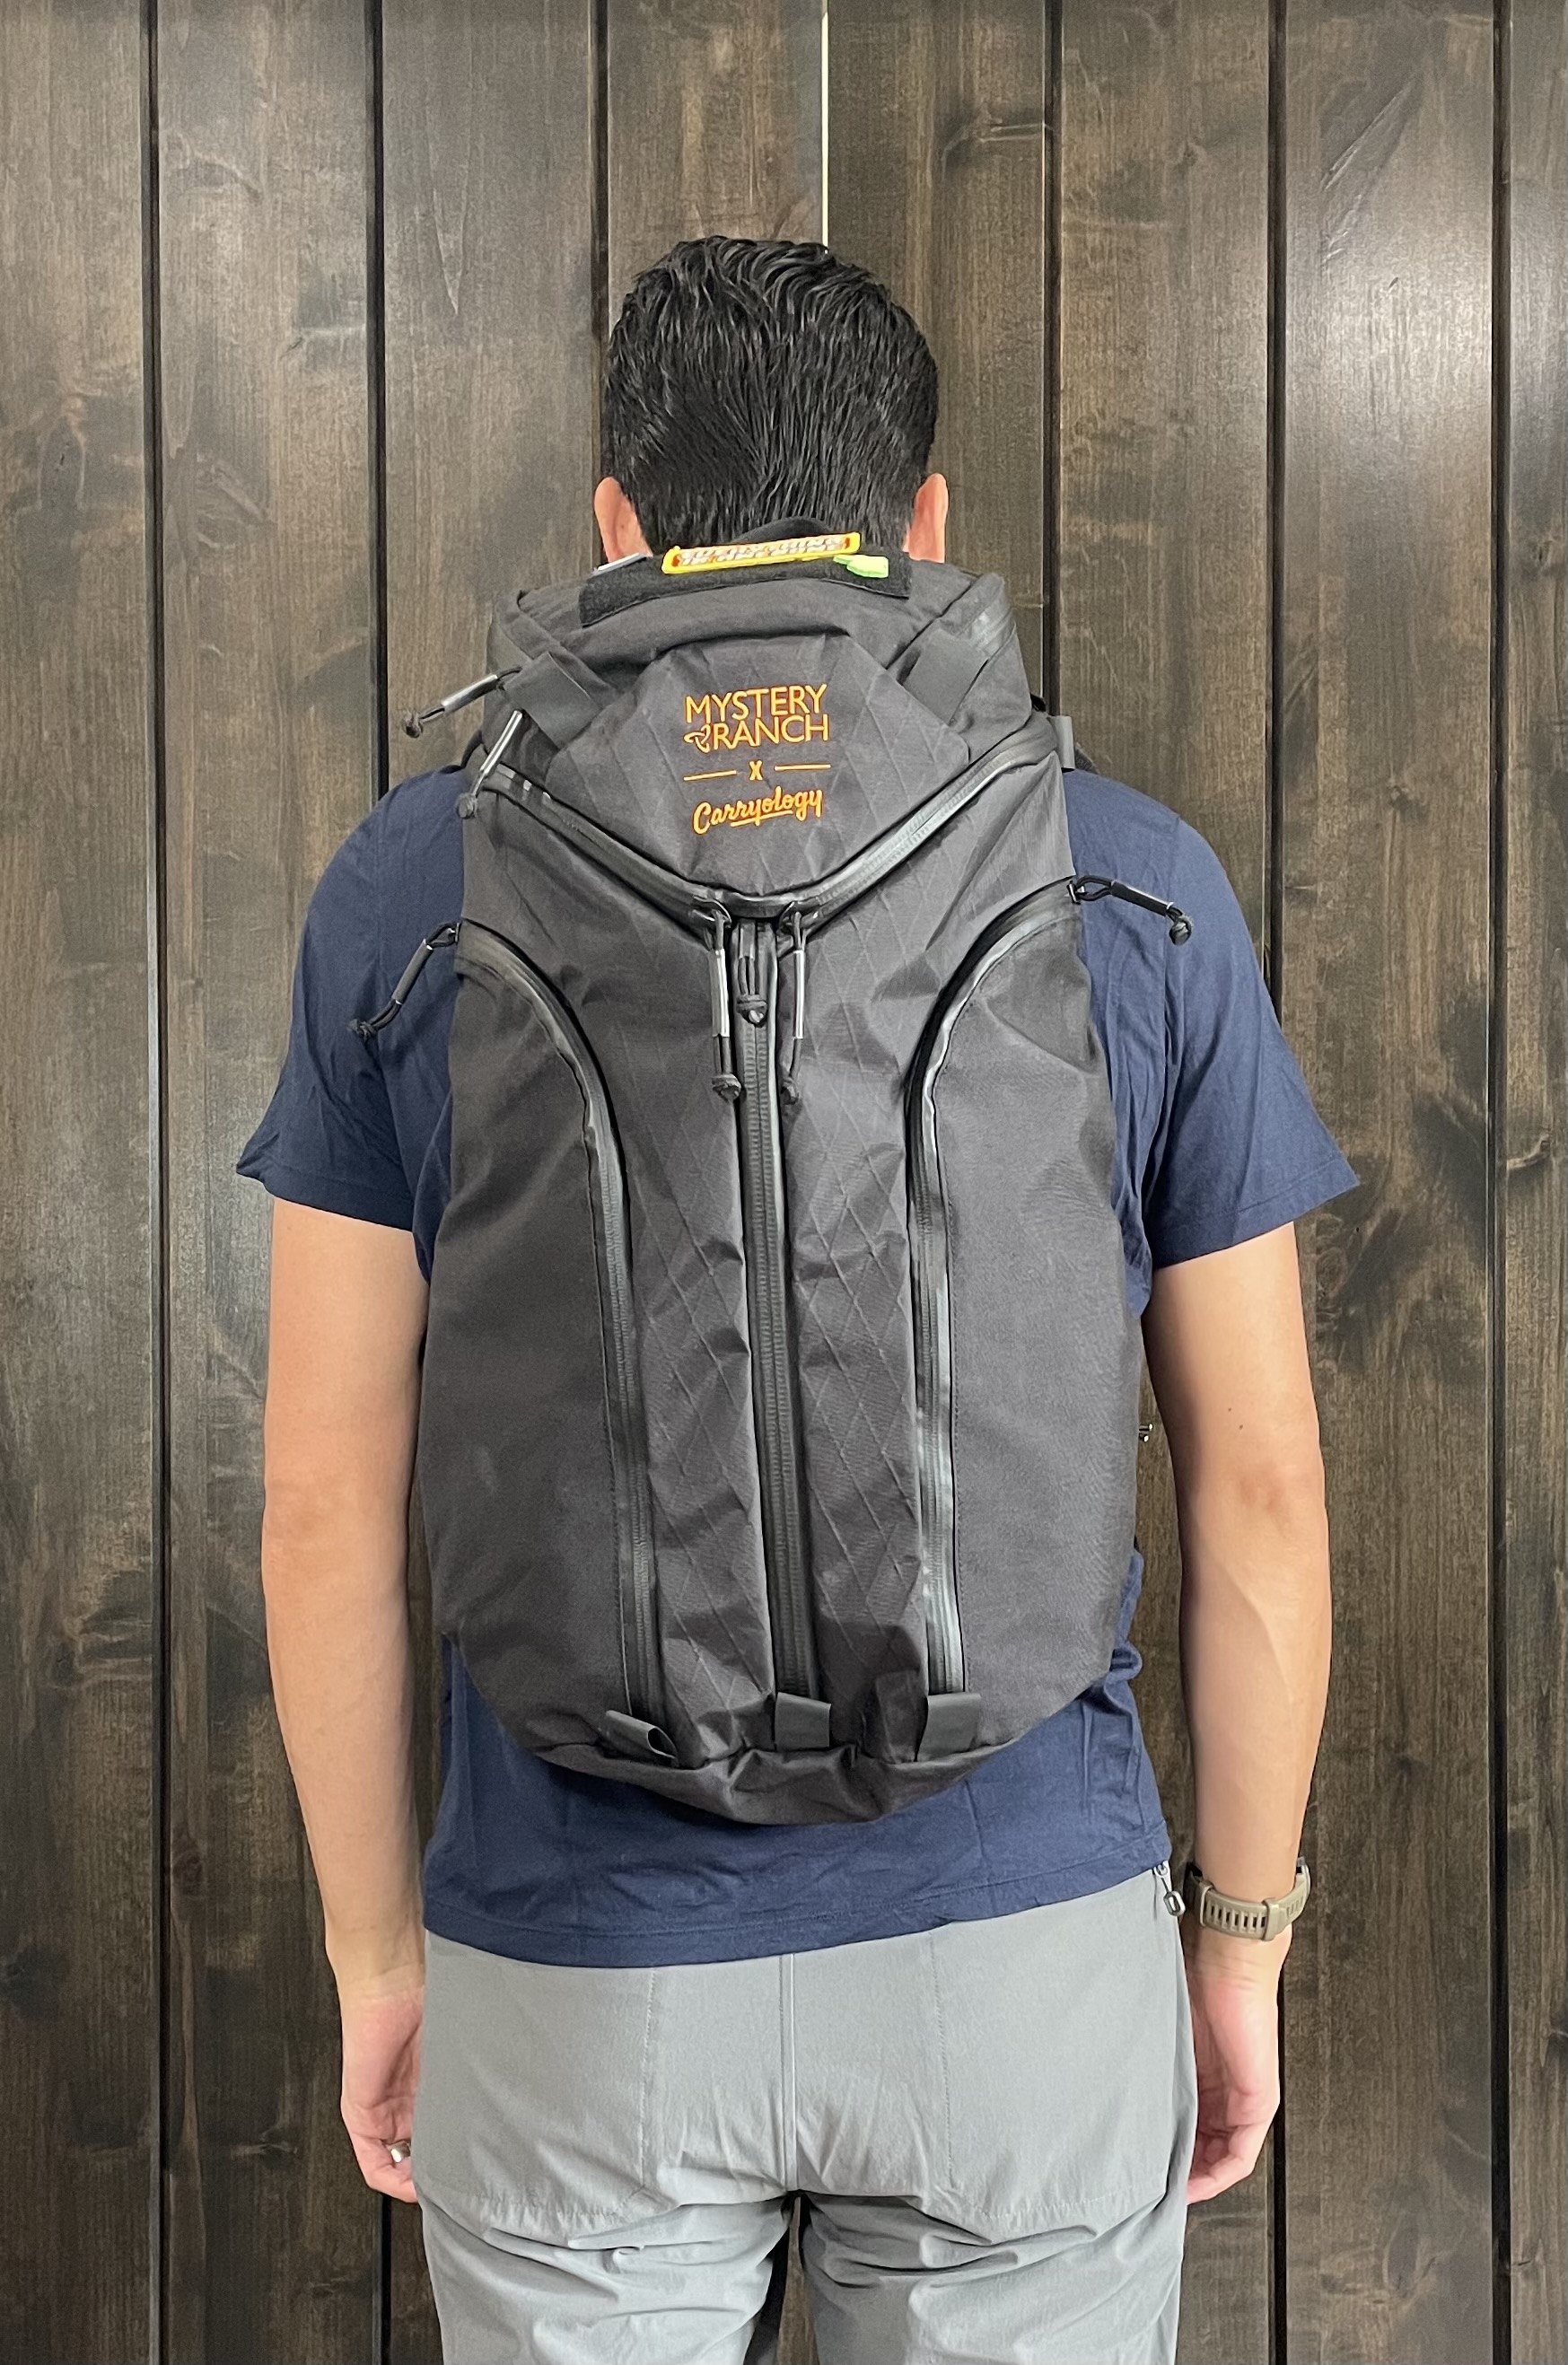 Mystery Ranch x Carryology Assault, aka 'Unicorn' – The Brooks Review